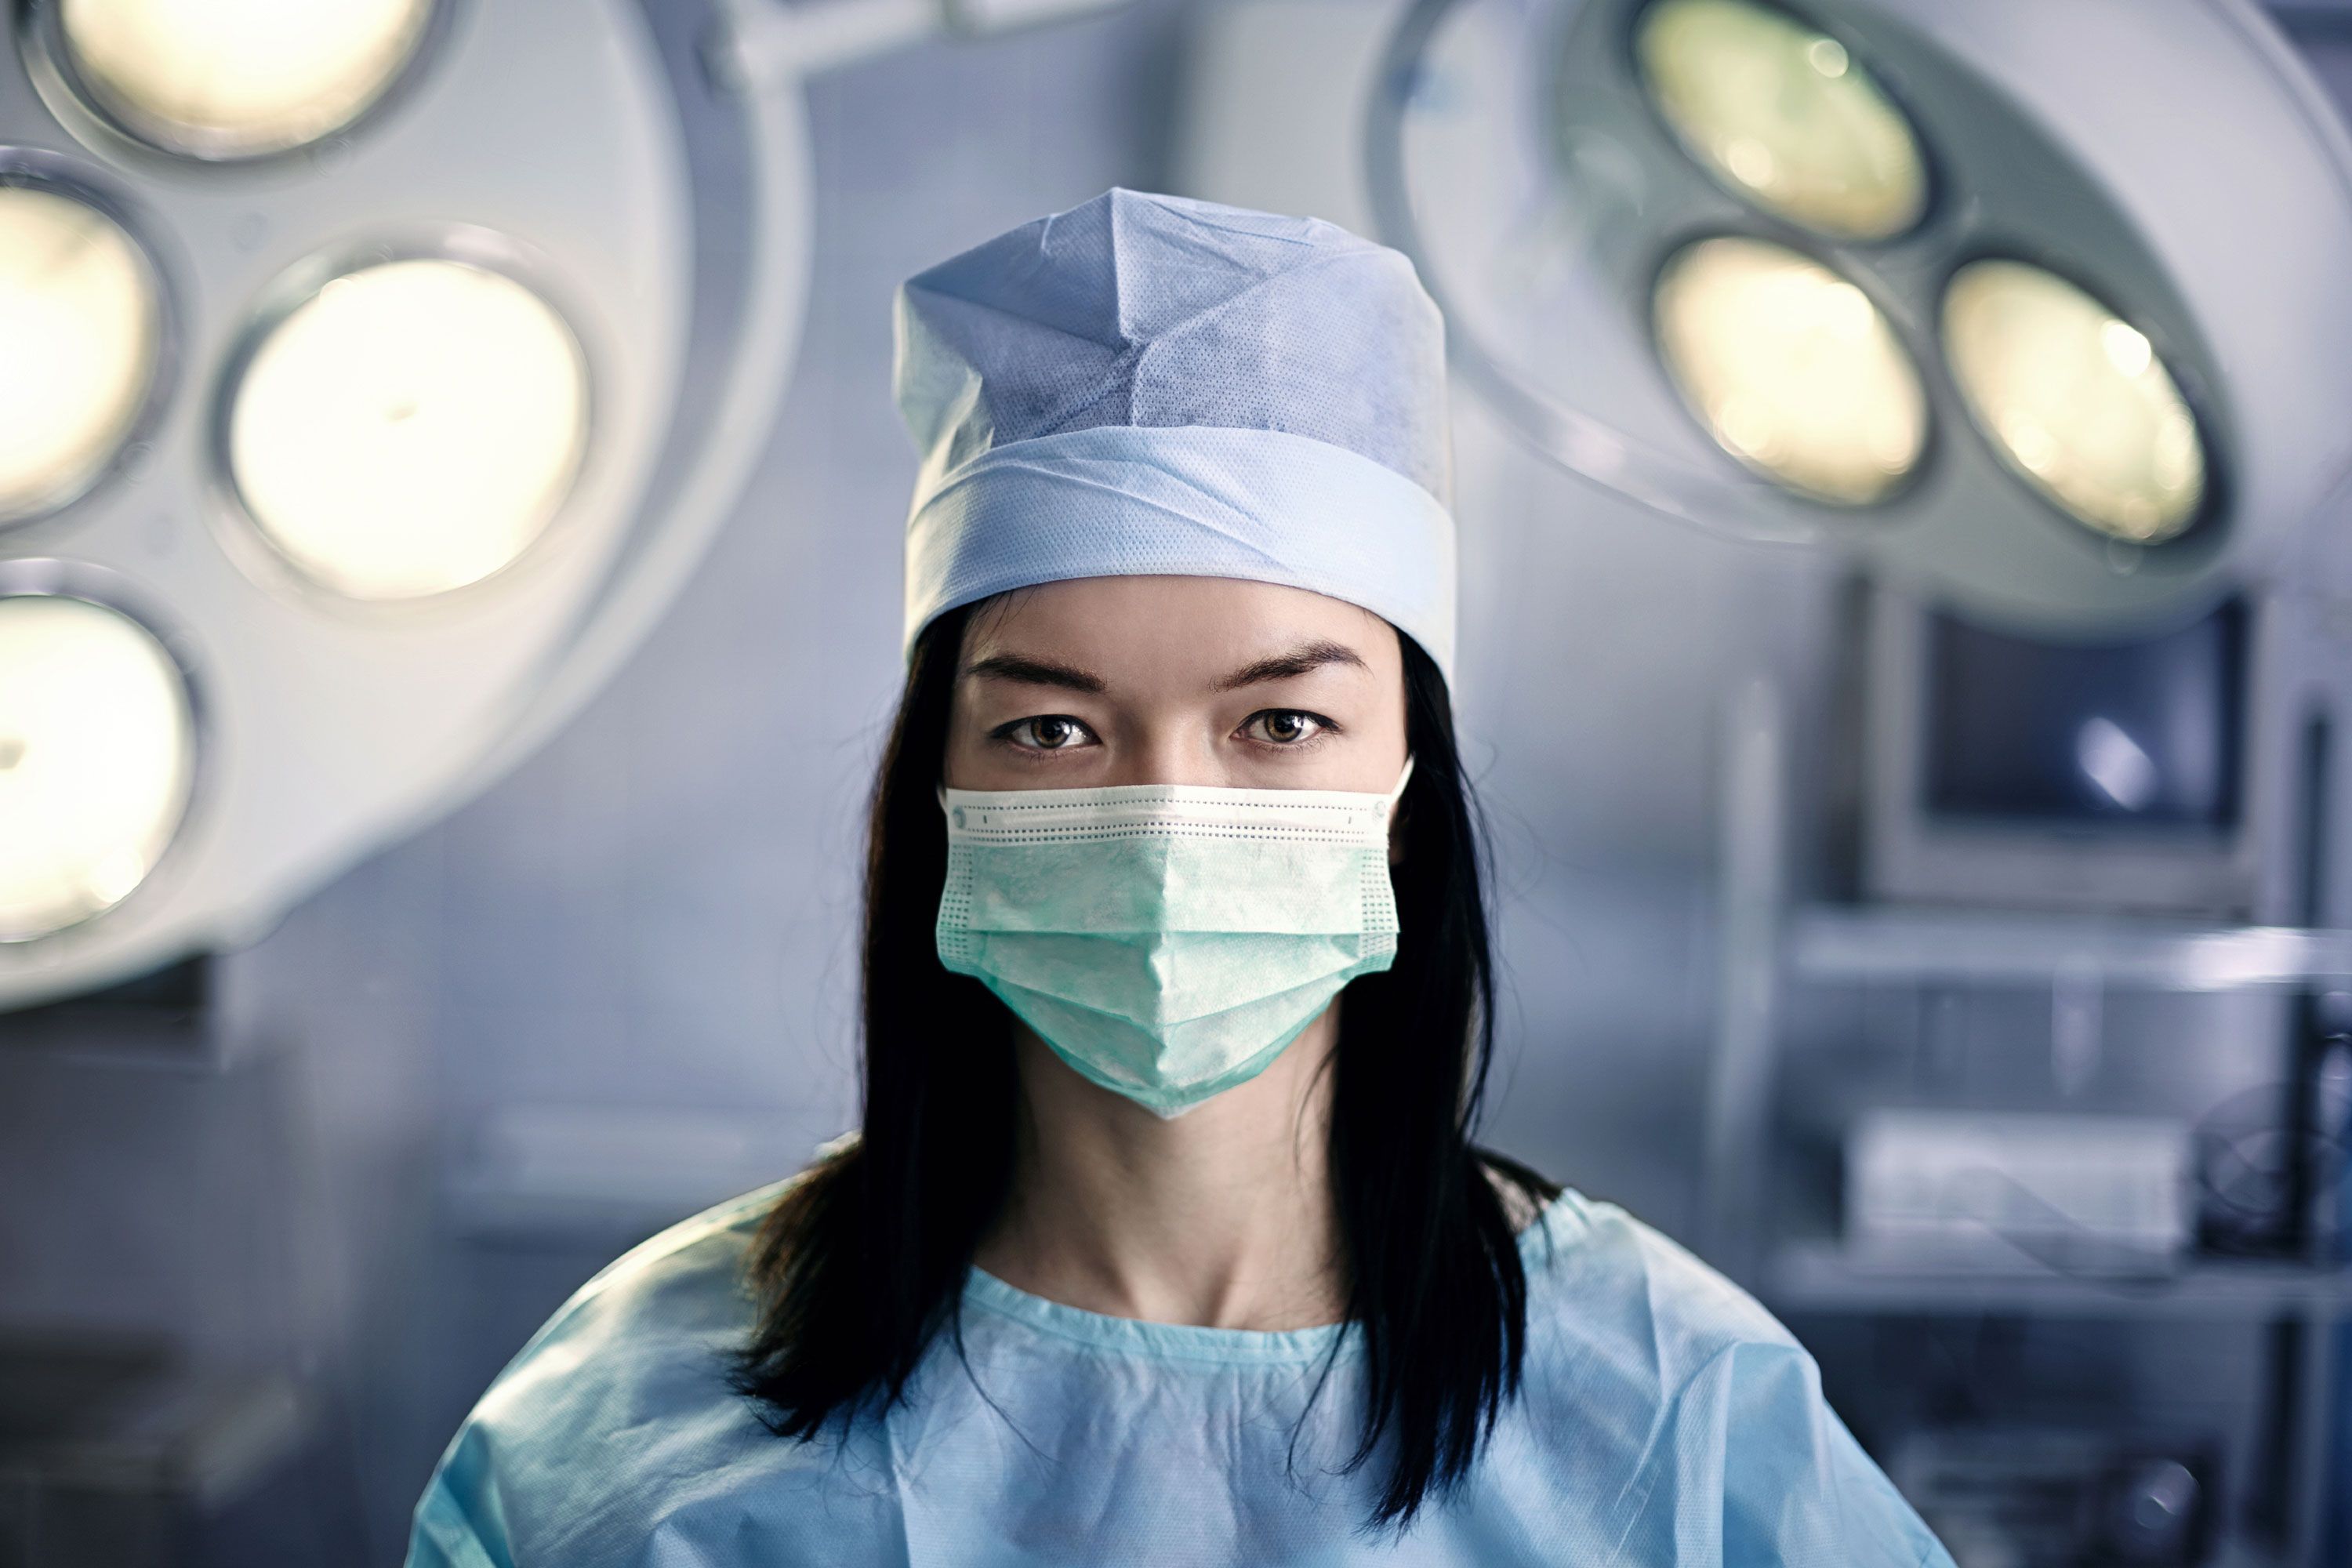 13 Things I Wish I Knew Before I Became a Plastic Surgeon